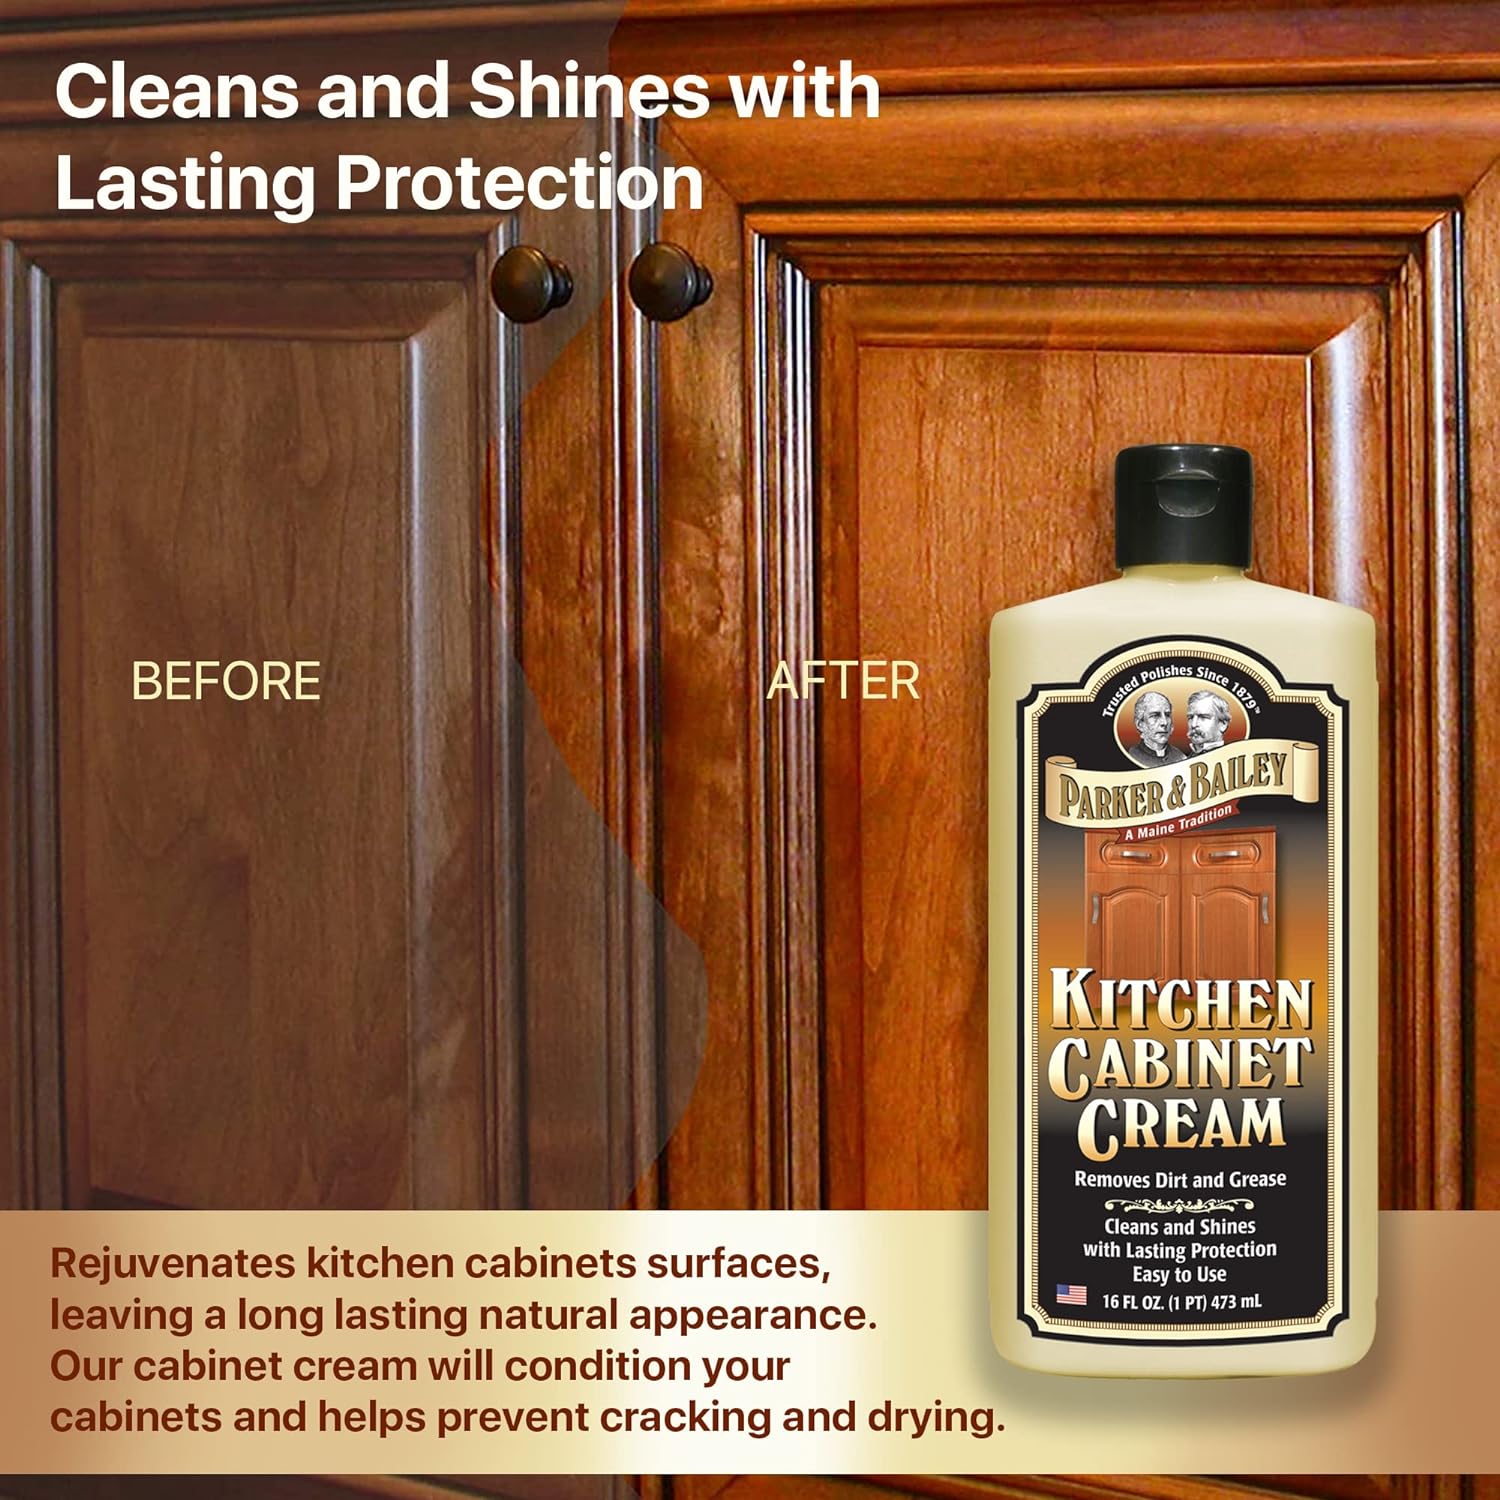 PARKER & BAILEY KITCHEN CABINET CREAM - Multisurface Wood Cleaner And Polish Furniture Quick Shine Restorer Protector Surface, House Cleaning Supplies Home Improvement 8oz : Health & Household